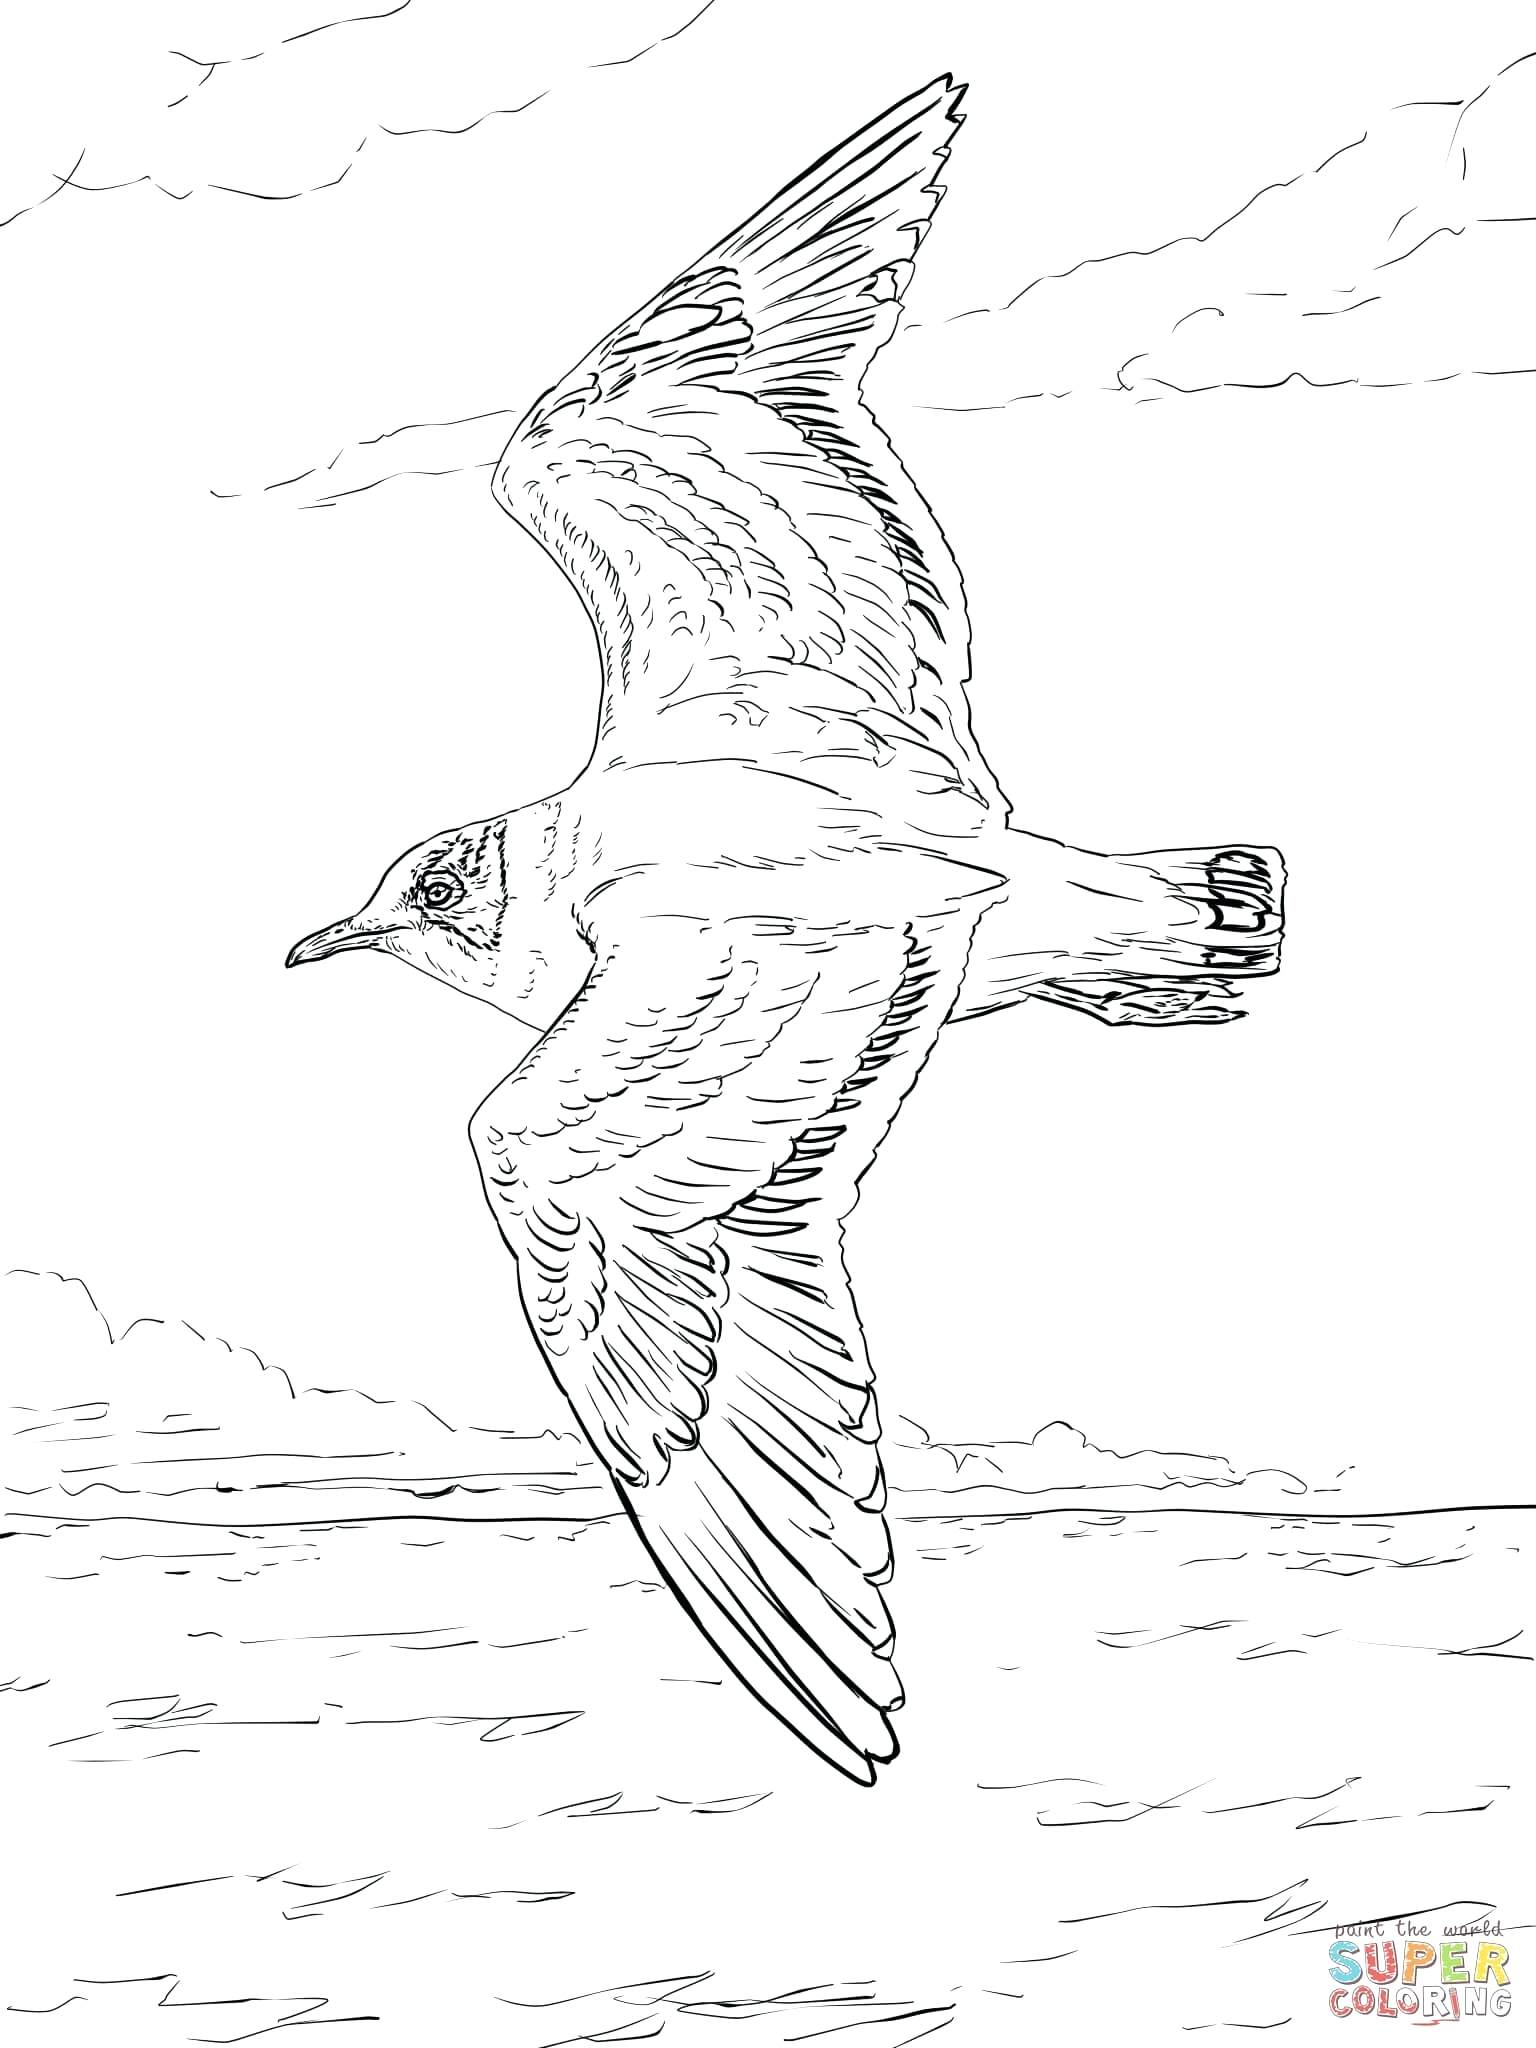 Flying Seagull Drawing at GetDrawings.com | Free for personal use ...